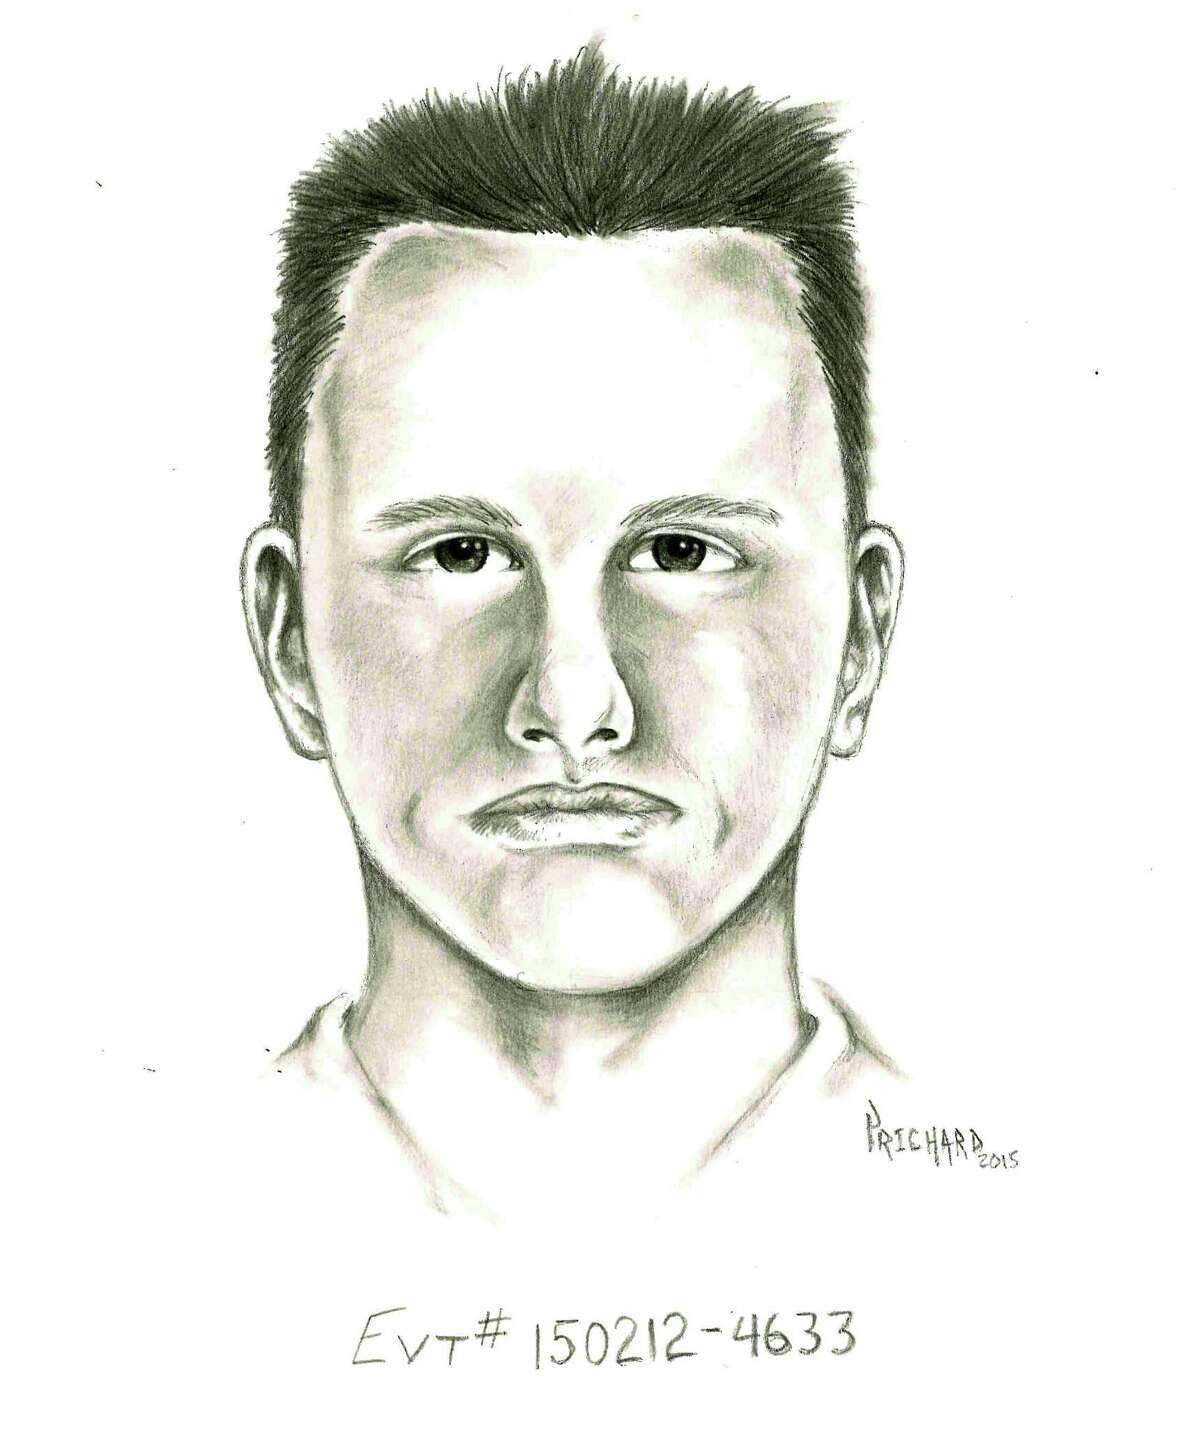 This undated artist rendition provided by the Las Vegas Metropolitan Police Department shows a composite sketch of a suspect police are seeking the publicís assistance in identifying, whom they believed was involved in a road rage shooting in Las Vegas on Feb. 12, 2015. A Las Vegas mother of four killed in a road rage shooting last week got in her car with her adult son and his gun and drove around their neighborhood looking for the assailant who ended up shooting her in a residential cul-de-sac, police said Tuesday, Feb. 17, 2015. In a change from earlier accounts, police said 44-year-old Tammy Meyers had her teenage daughter run in the house to fetch her armed son, who then went with her as she drove to find the driver who had earlier stopped his car in front of hers, got out and approached her with angry words. (AP Photo/Las Vegas Metropolitan Police Department)